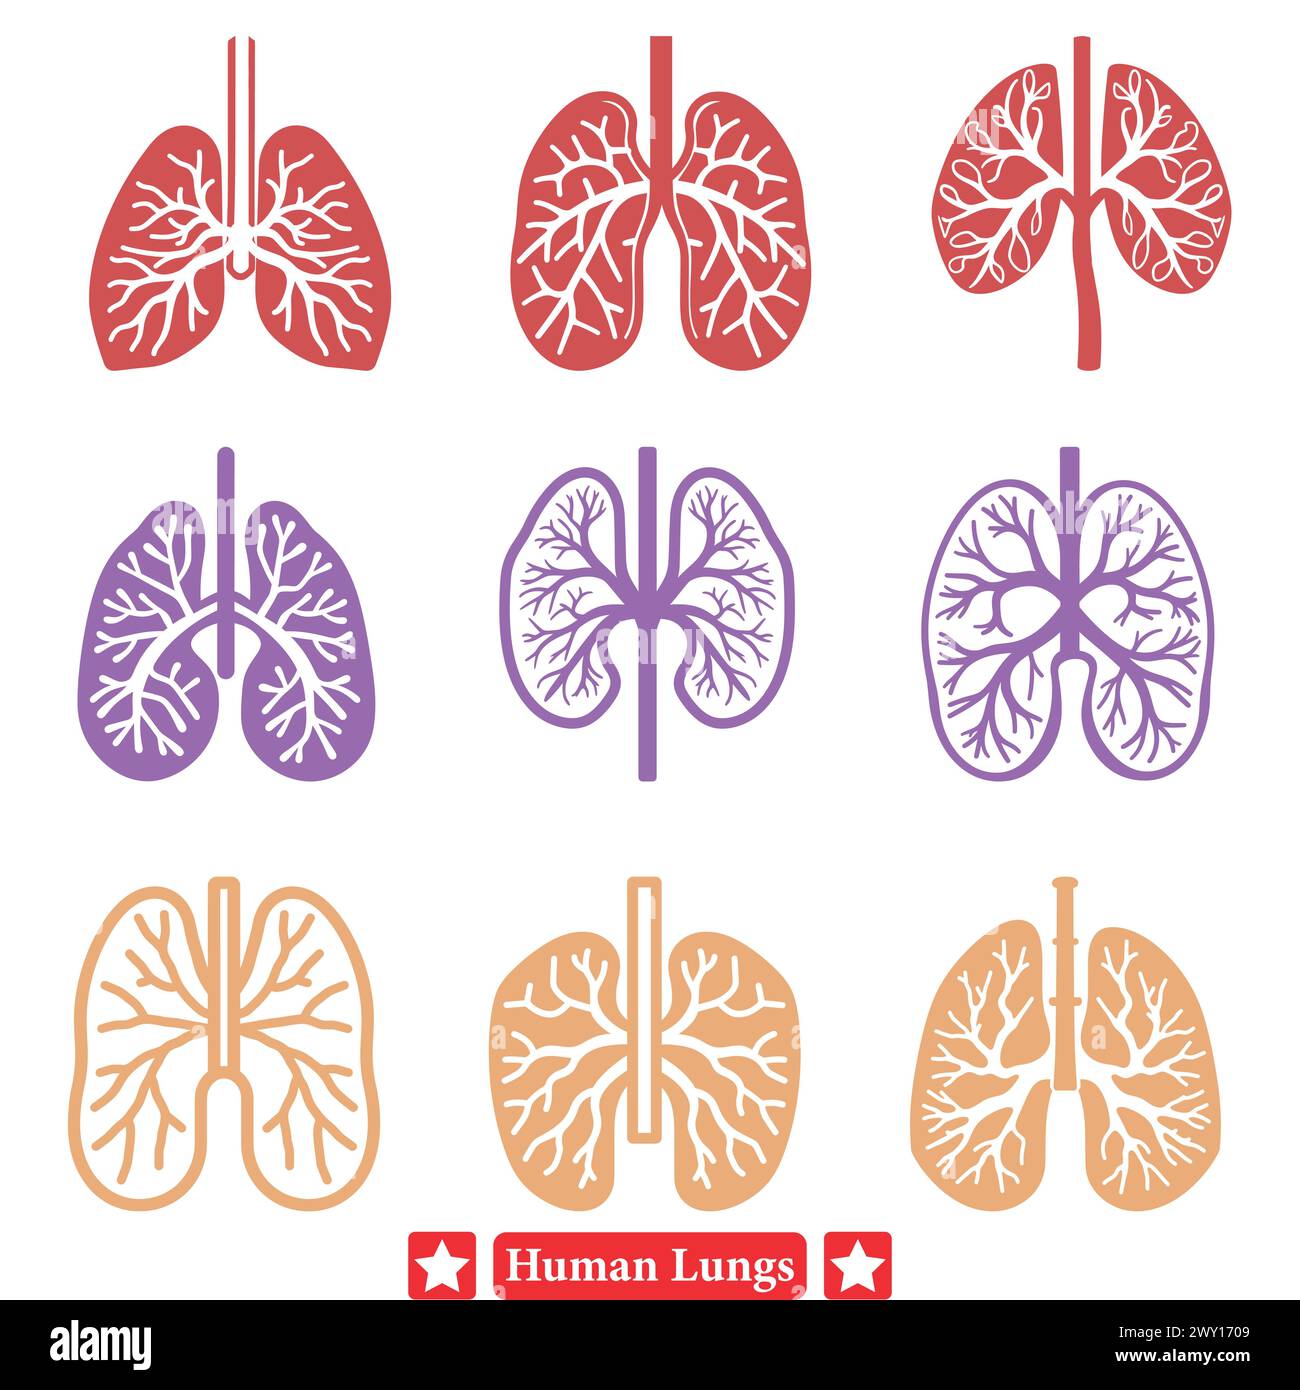 Precision crafted Human Lung Silhouettes Set for Health Awareness Campaign Materials Stock Vector